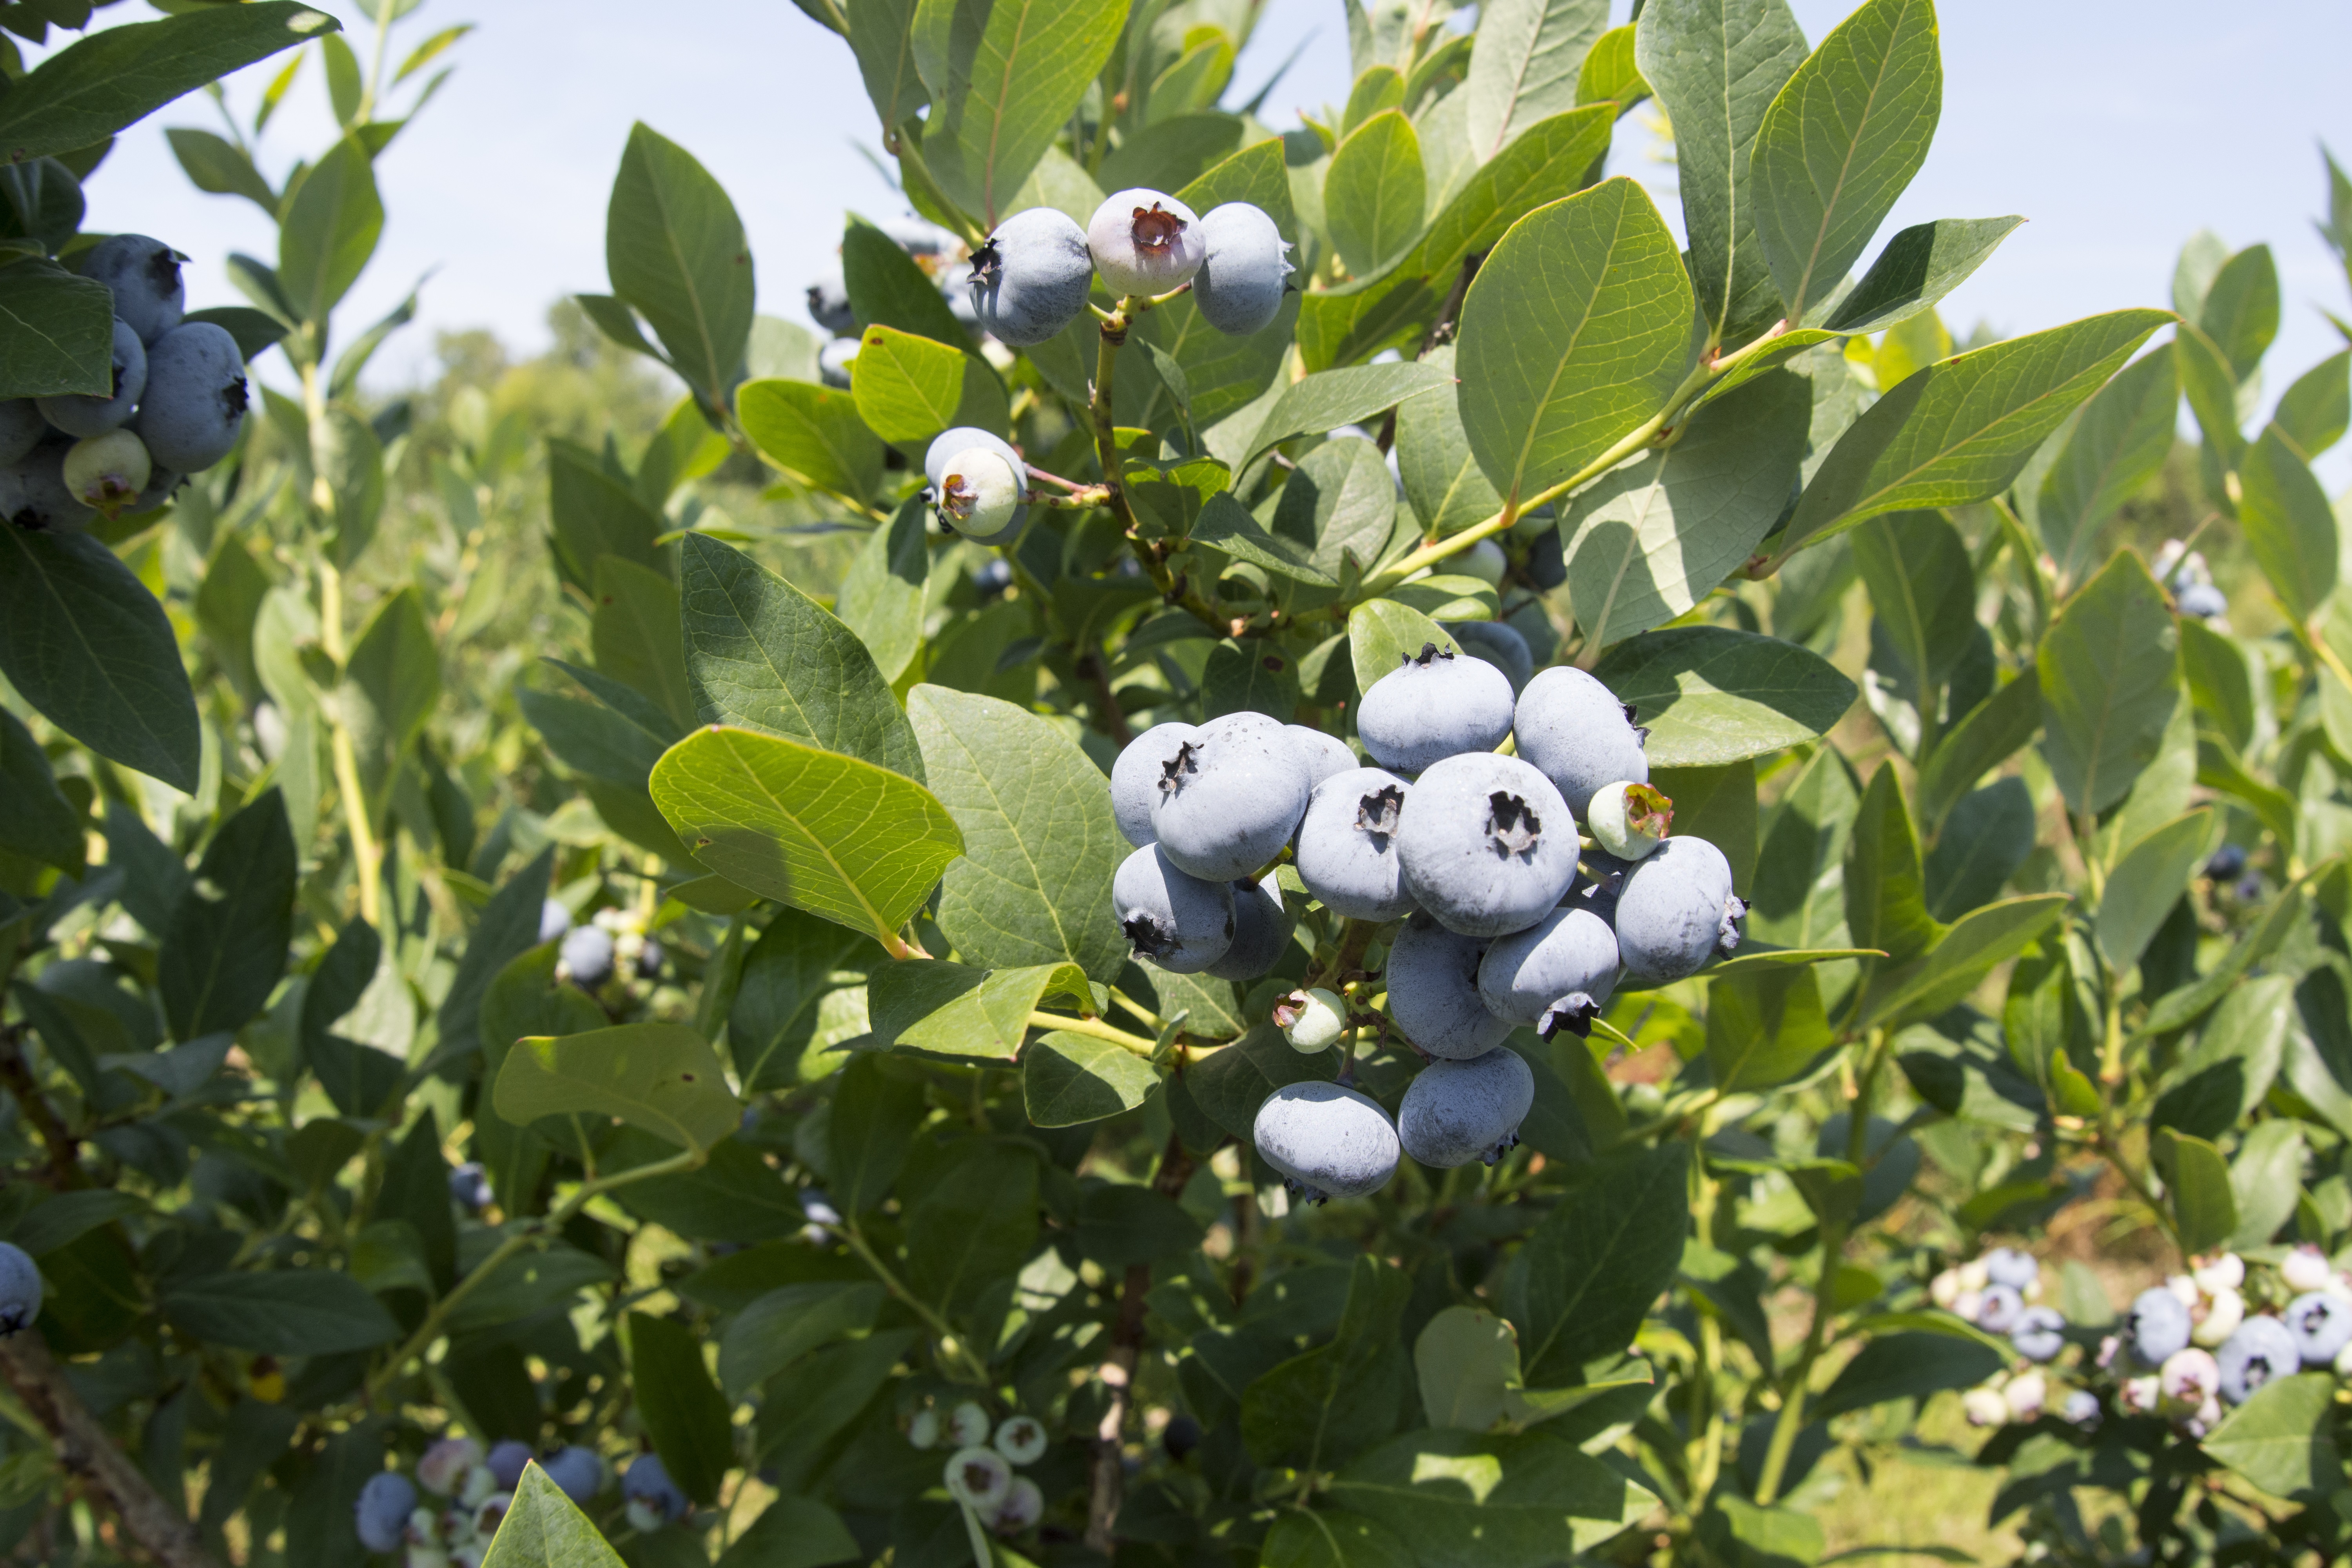 Blueberries are an important crop in southwest Michigan.